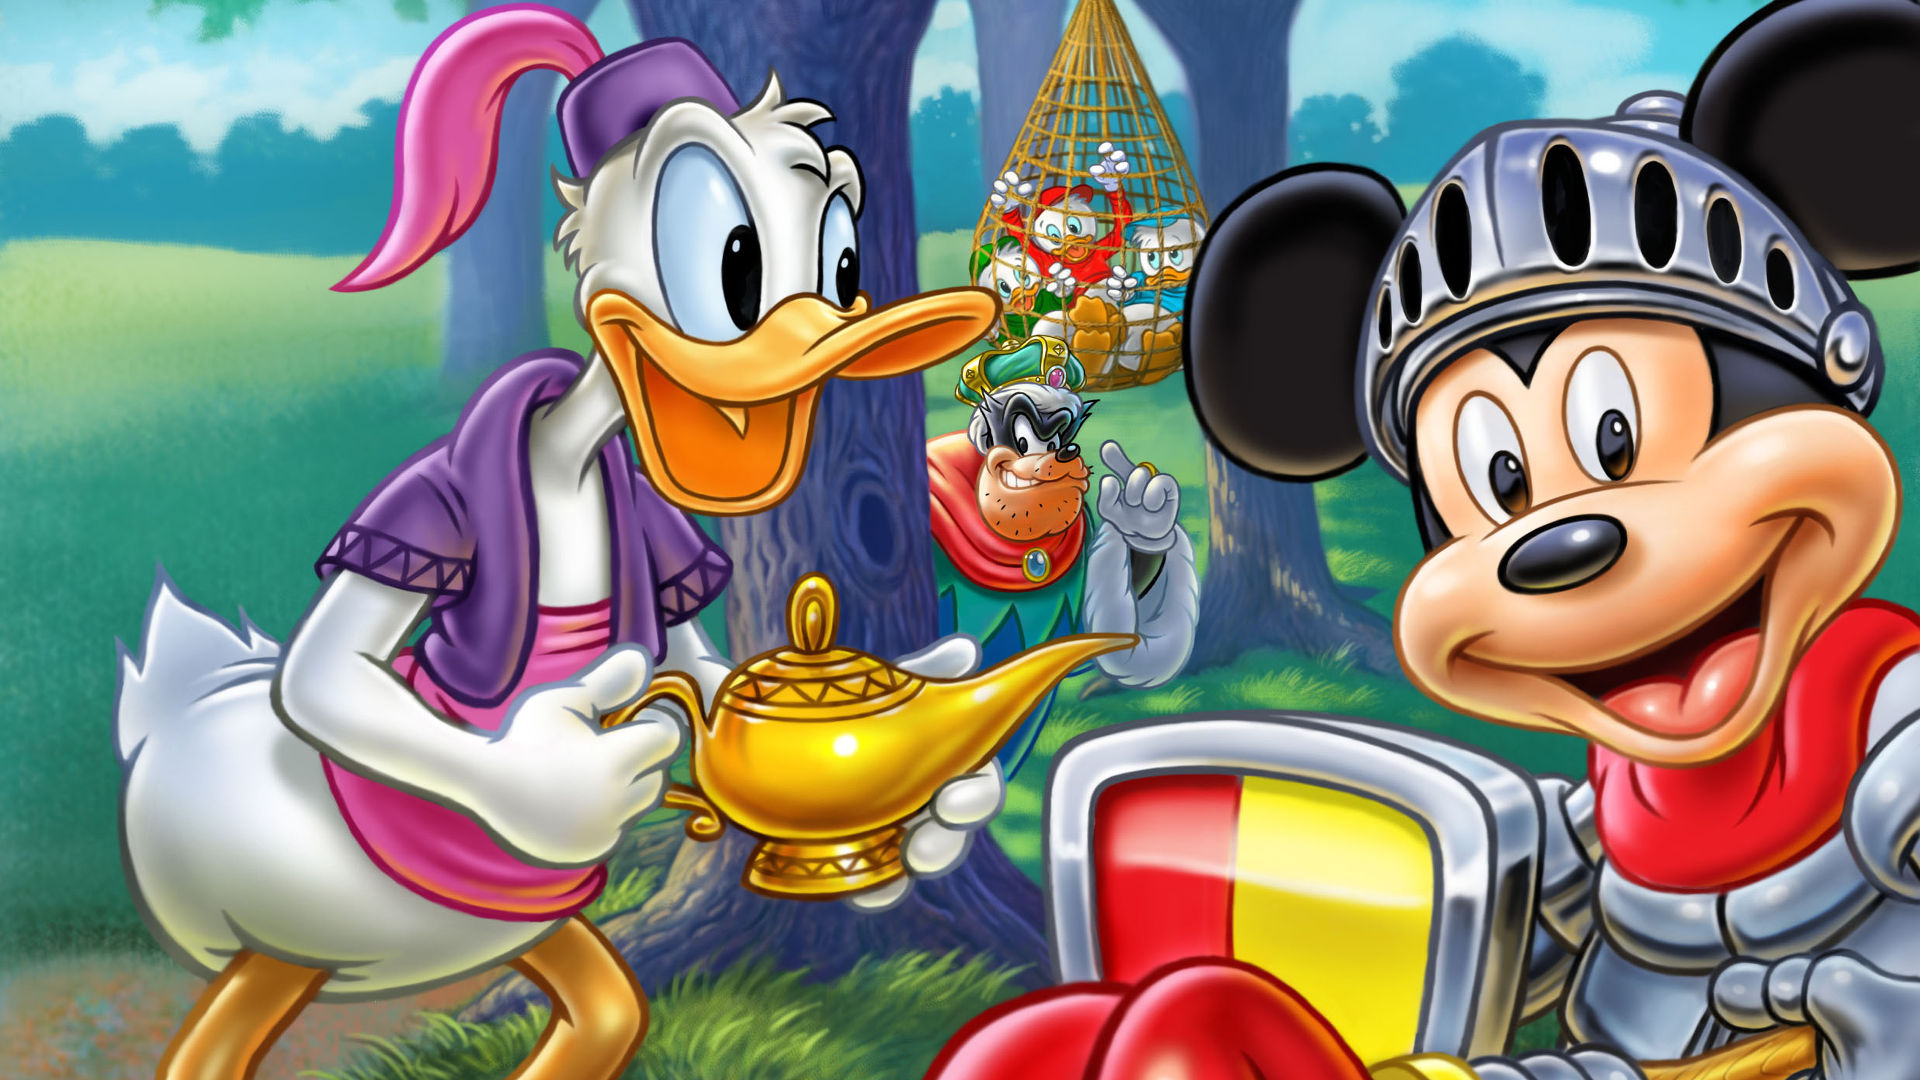 Mickey to Donald - Magical Adventure 3 Snes. Mickey to Donald - Magical Adventure 3. Приключения Микки и Дональда 1993.